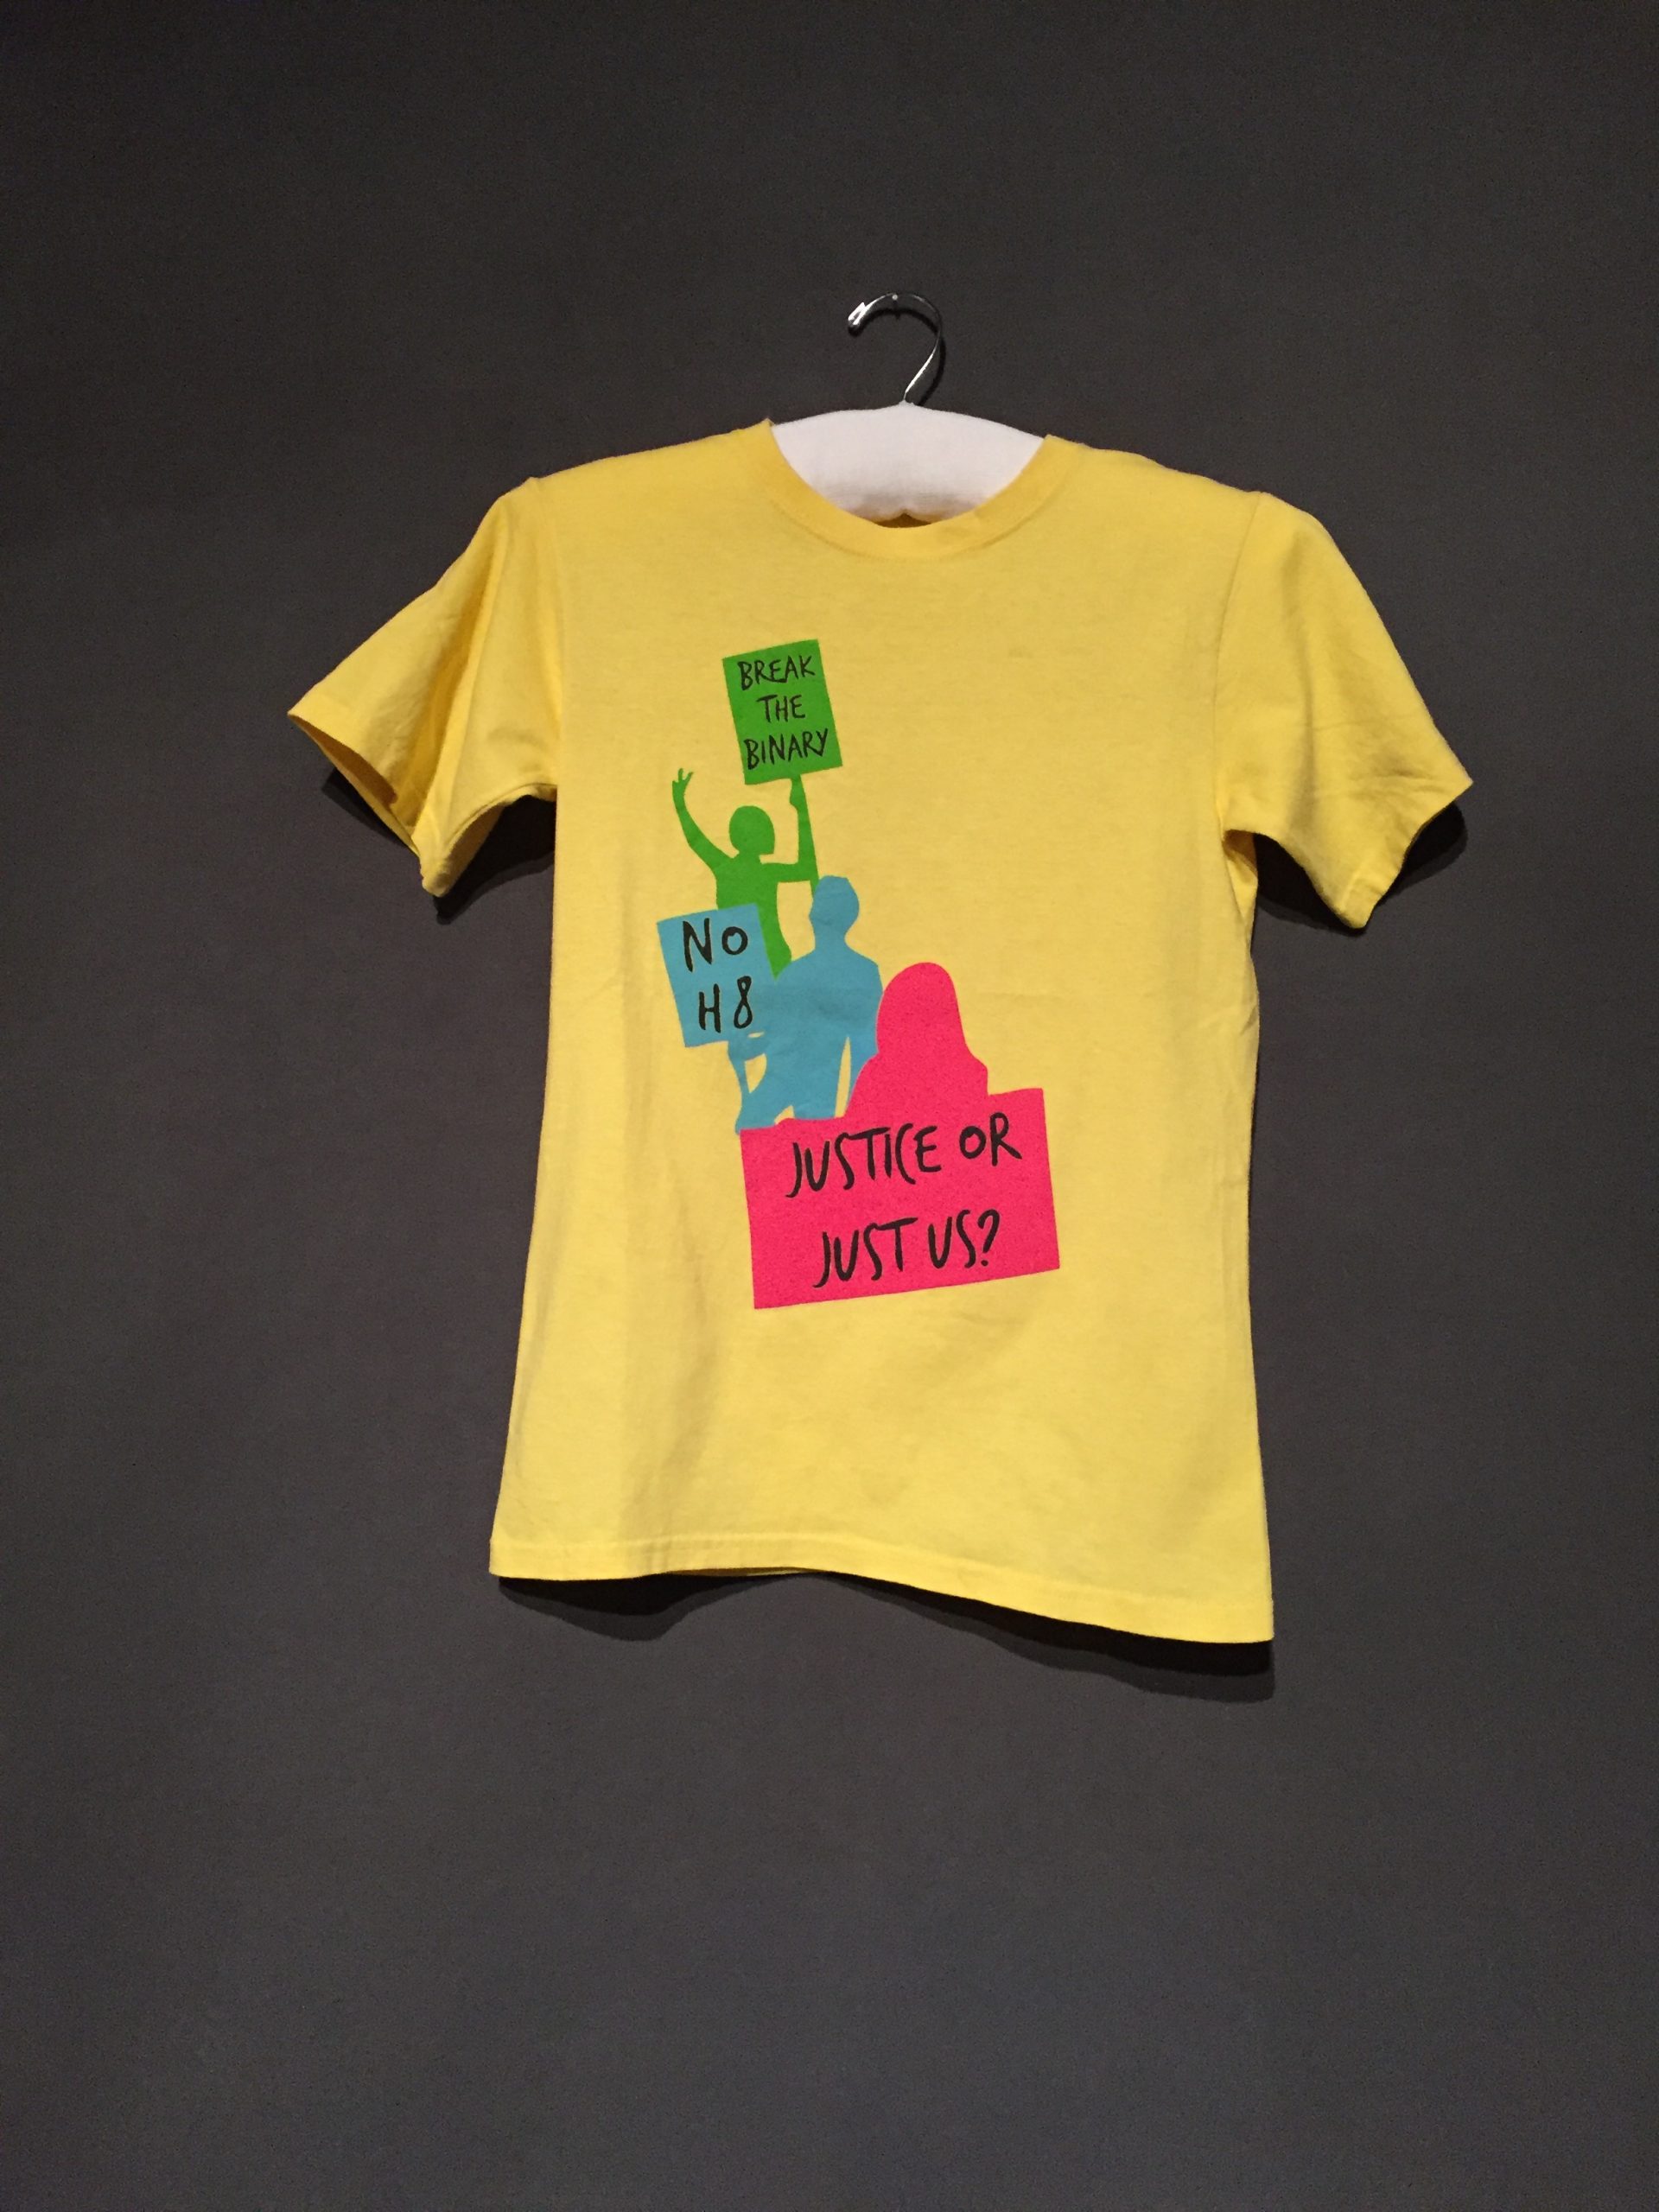 Yellow short sleeve t-shirt with protestor silhouettes in green, blue, and pink with signs reading in black text: "Break the Binary", "No H8", and "Justice or Just Us?"